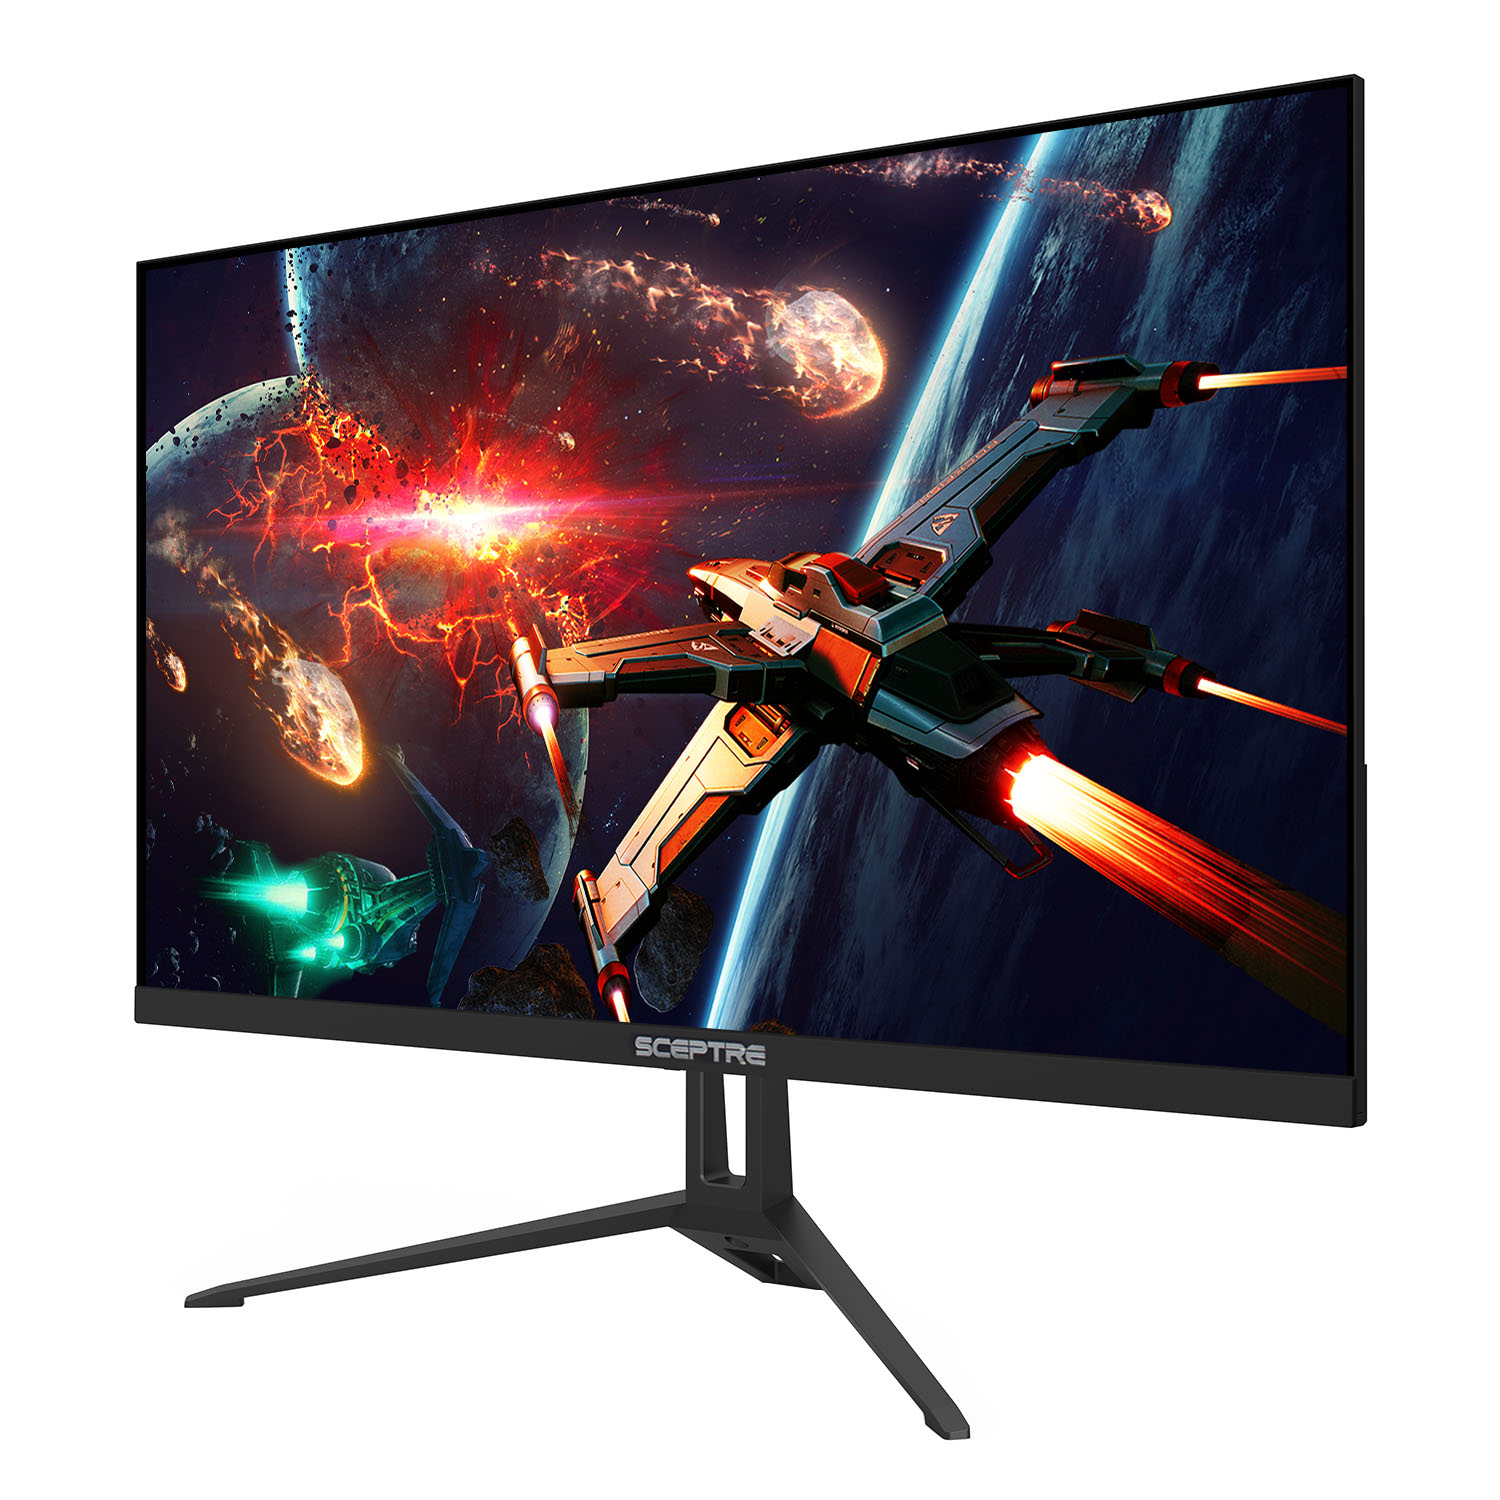 24" Gaming Monitor 1080p up to 165Hz 91% sRGB AMD FreeSync, Build-in Speakers Machine Black 2022 (E248B-FWS168) - image 5 of 6